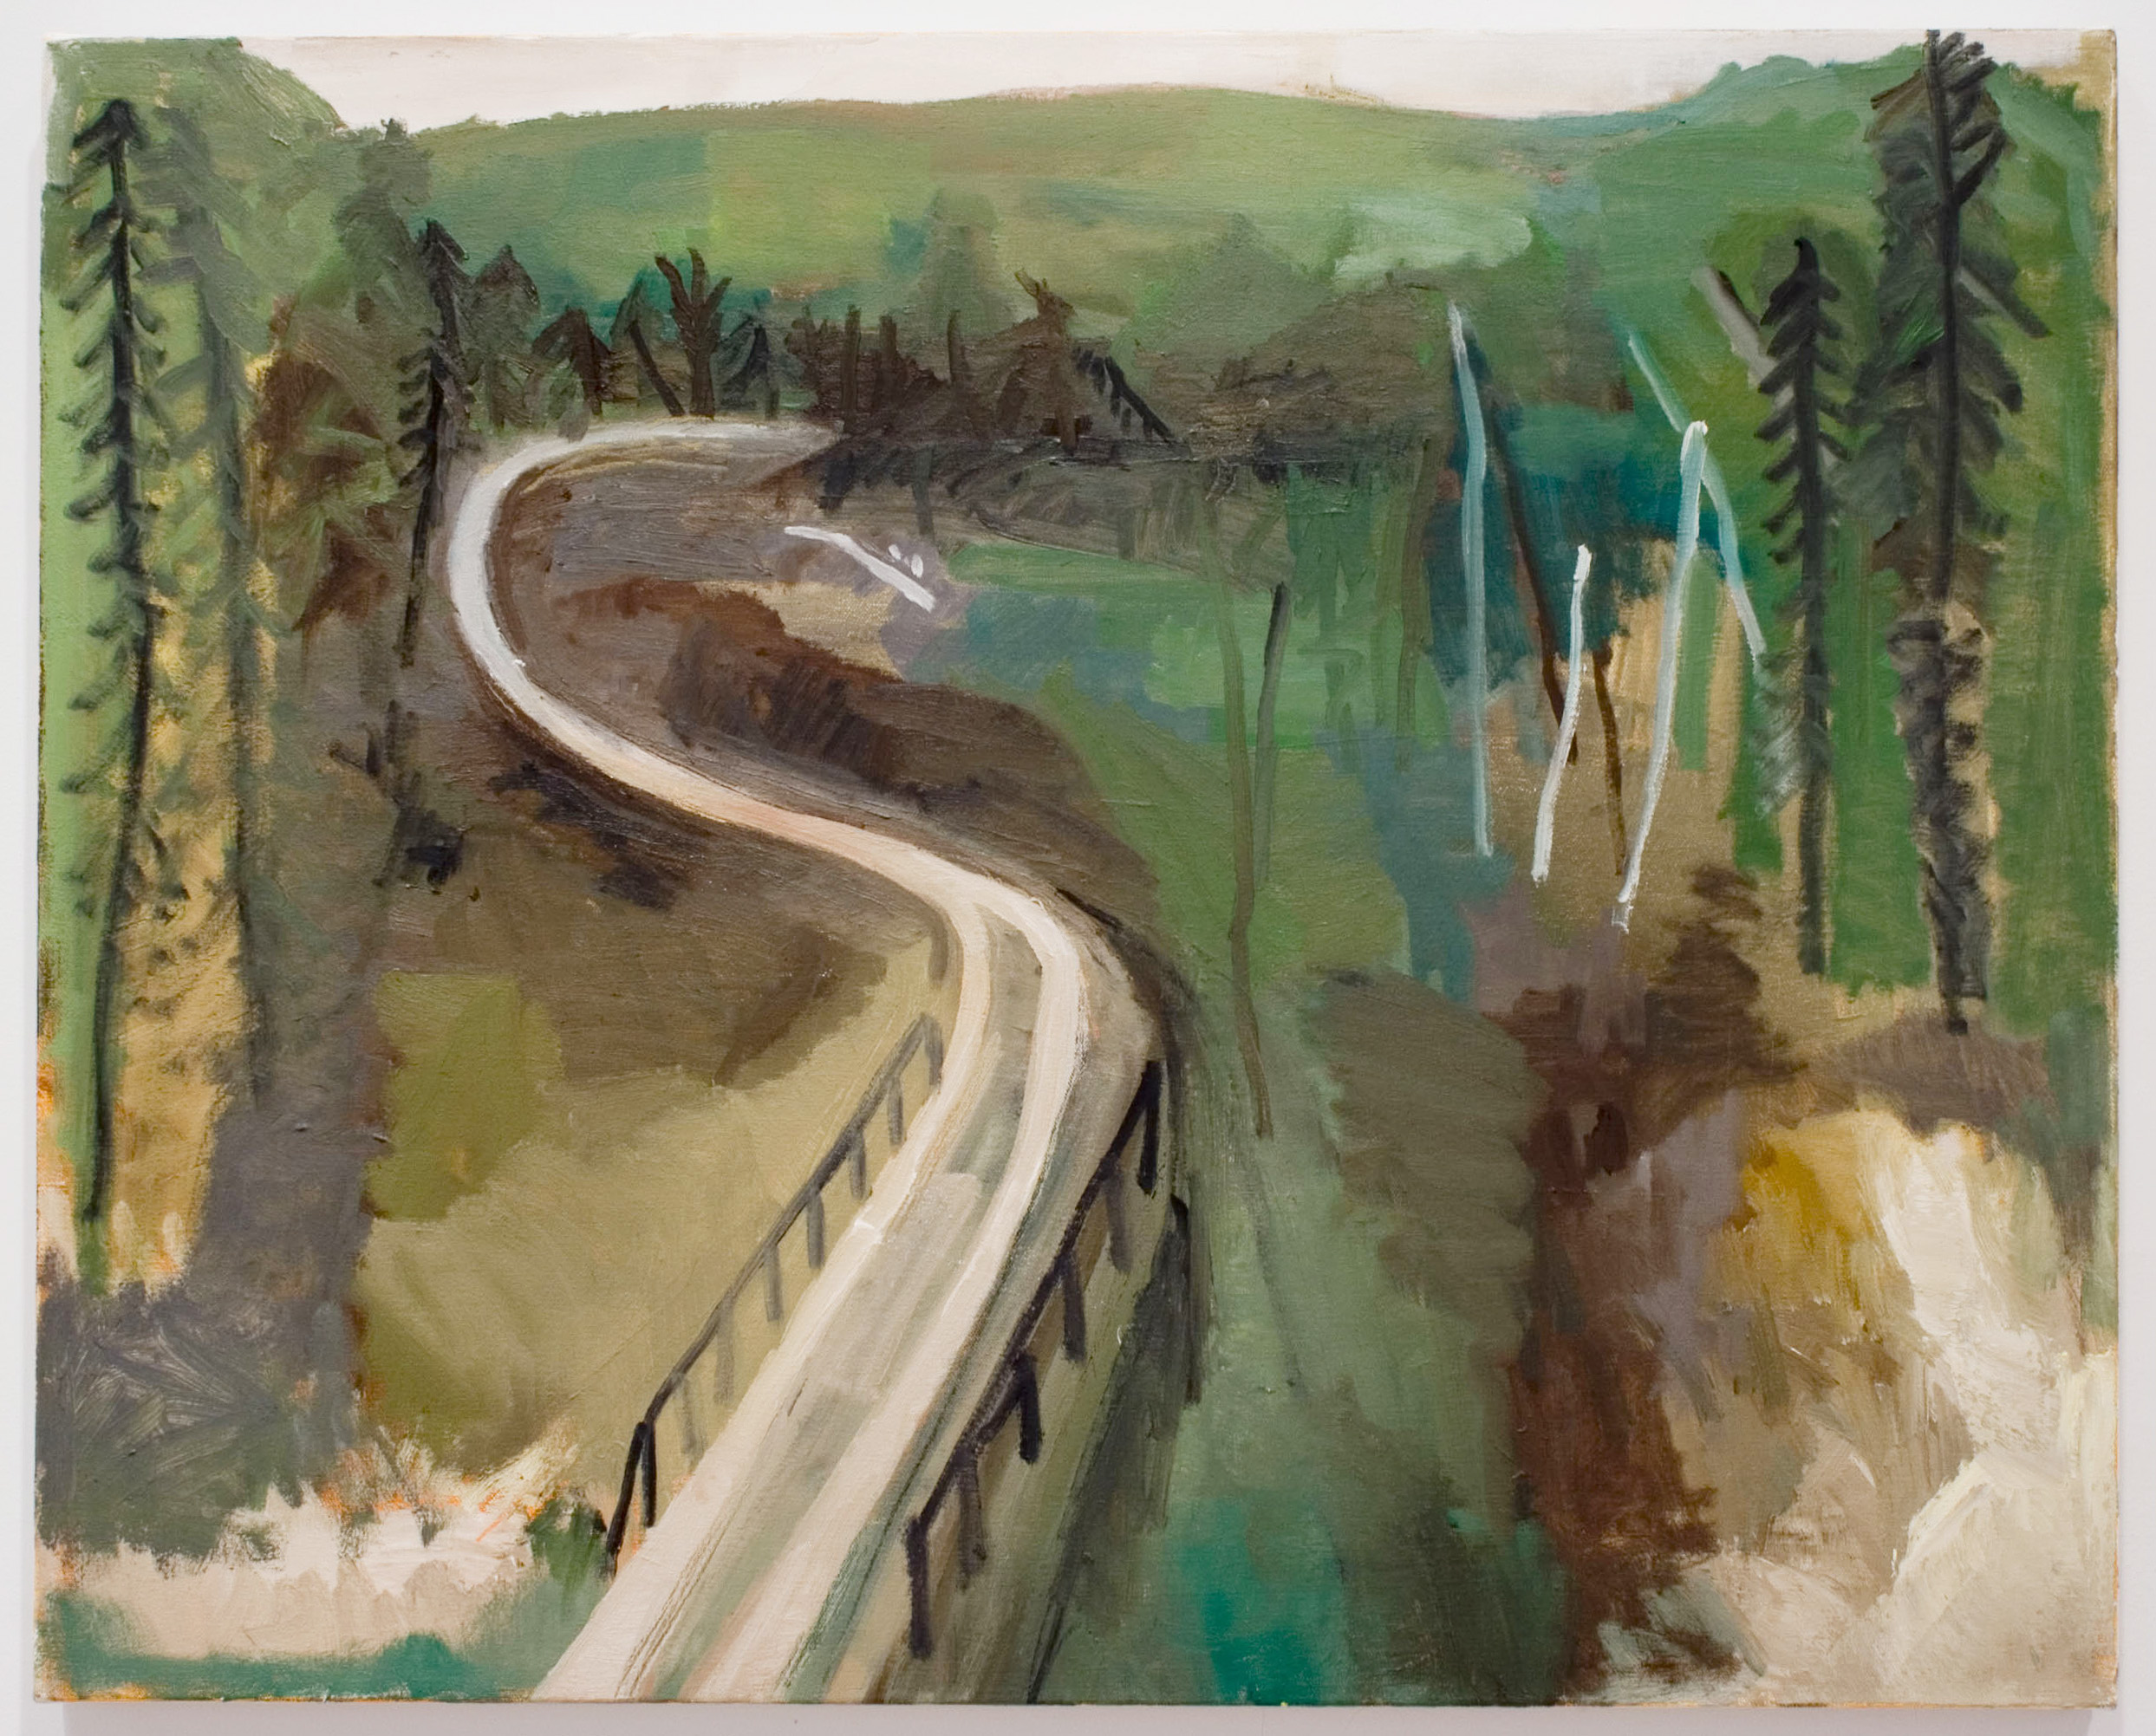  Logging Road, oil on canvas, 24 x 30 inches, 2010. 